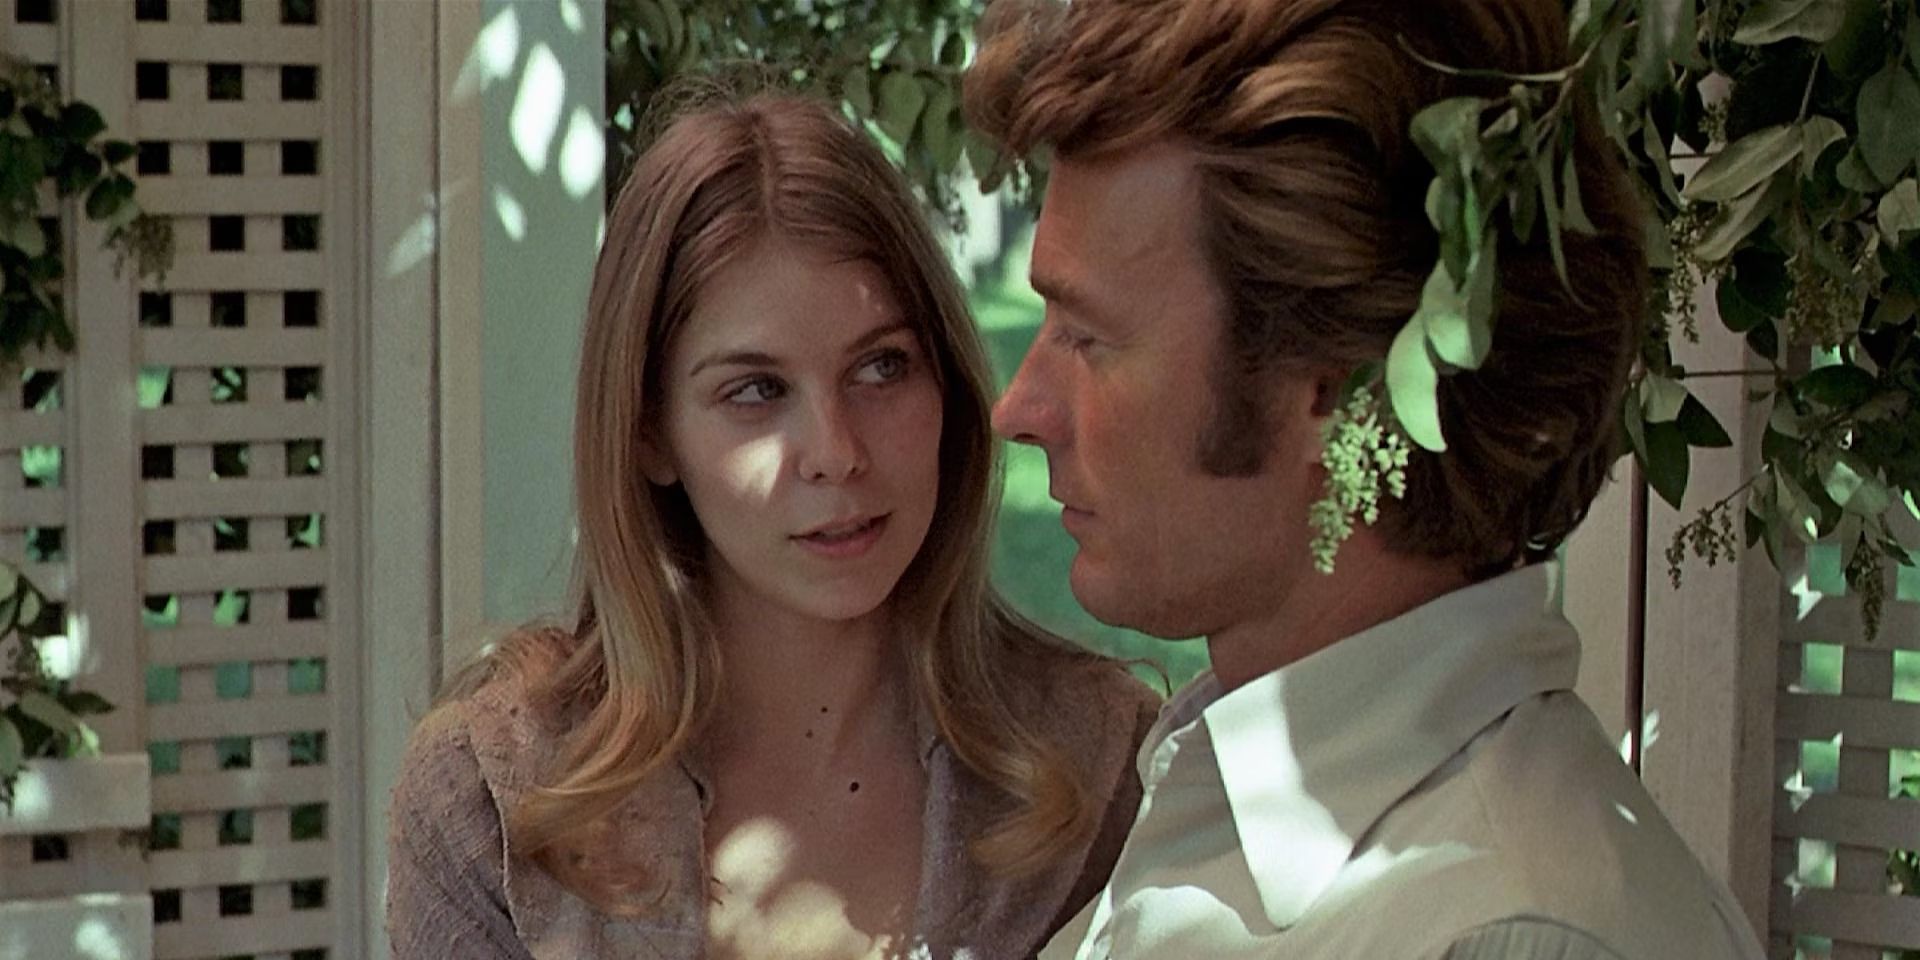 Clint Eastwood and Jo Ann Harris in The Beguiled (1971)